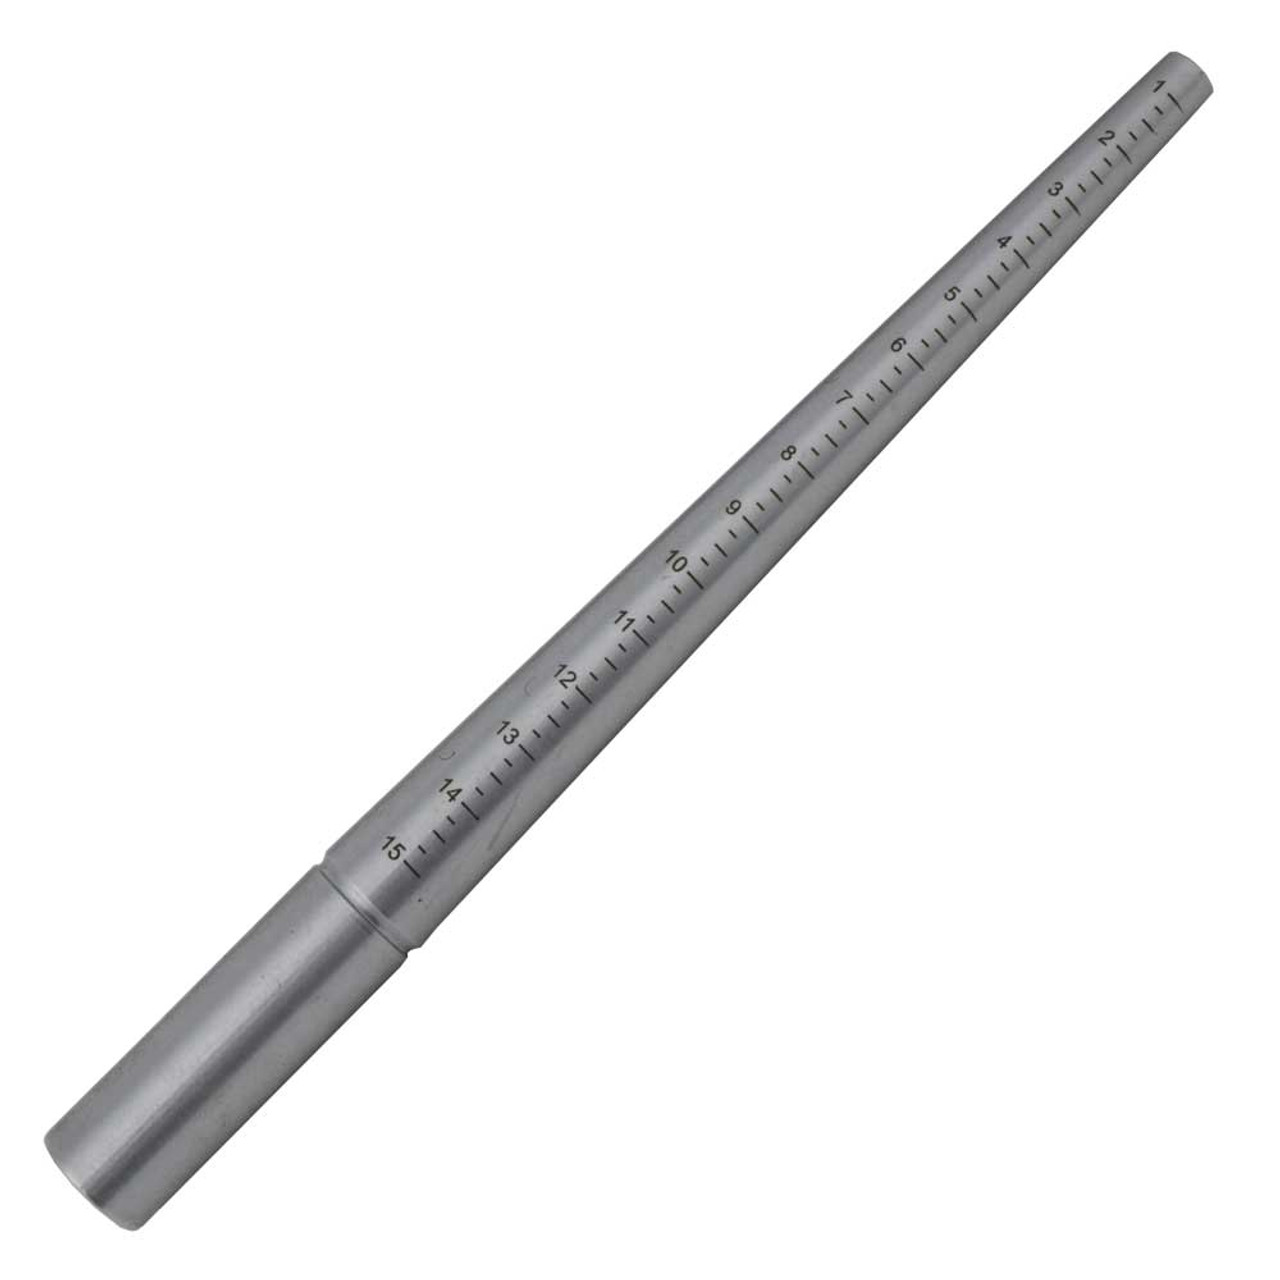 Ring mandrel, 60mm long - 5 dimensions of your choice: 12, 14, 16, 17, 18,  19 or 20mm